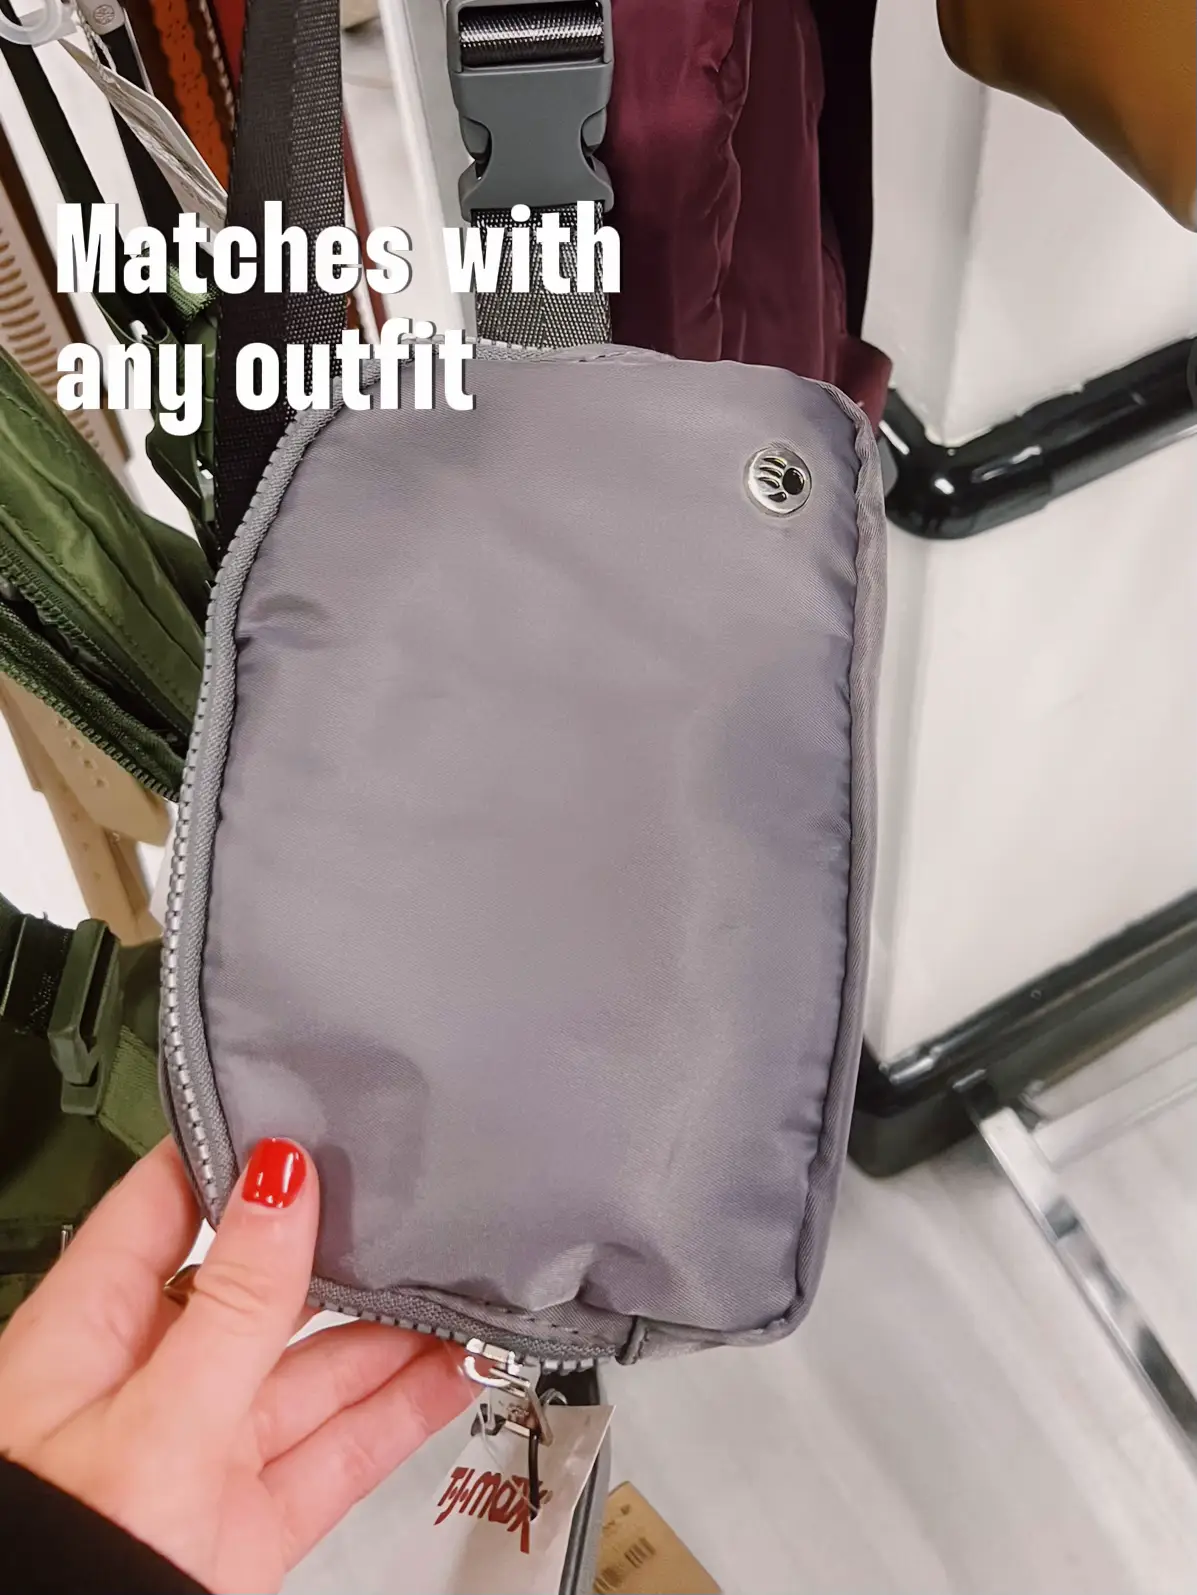 Lululemon Dupes at Tj Maxx for less!